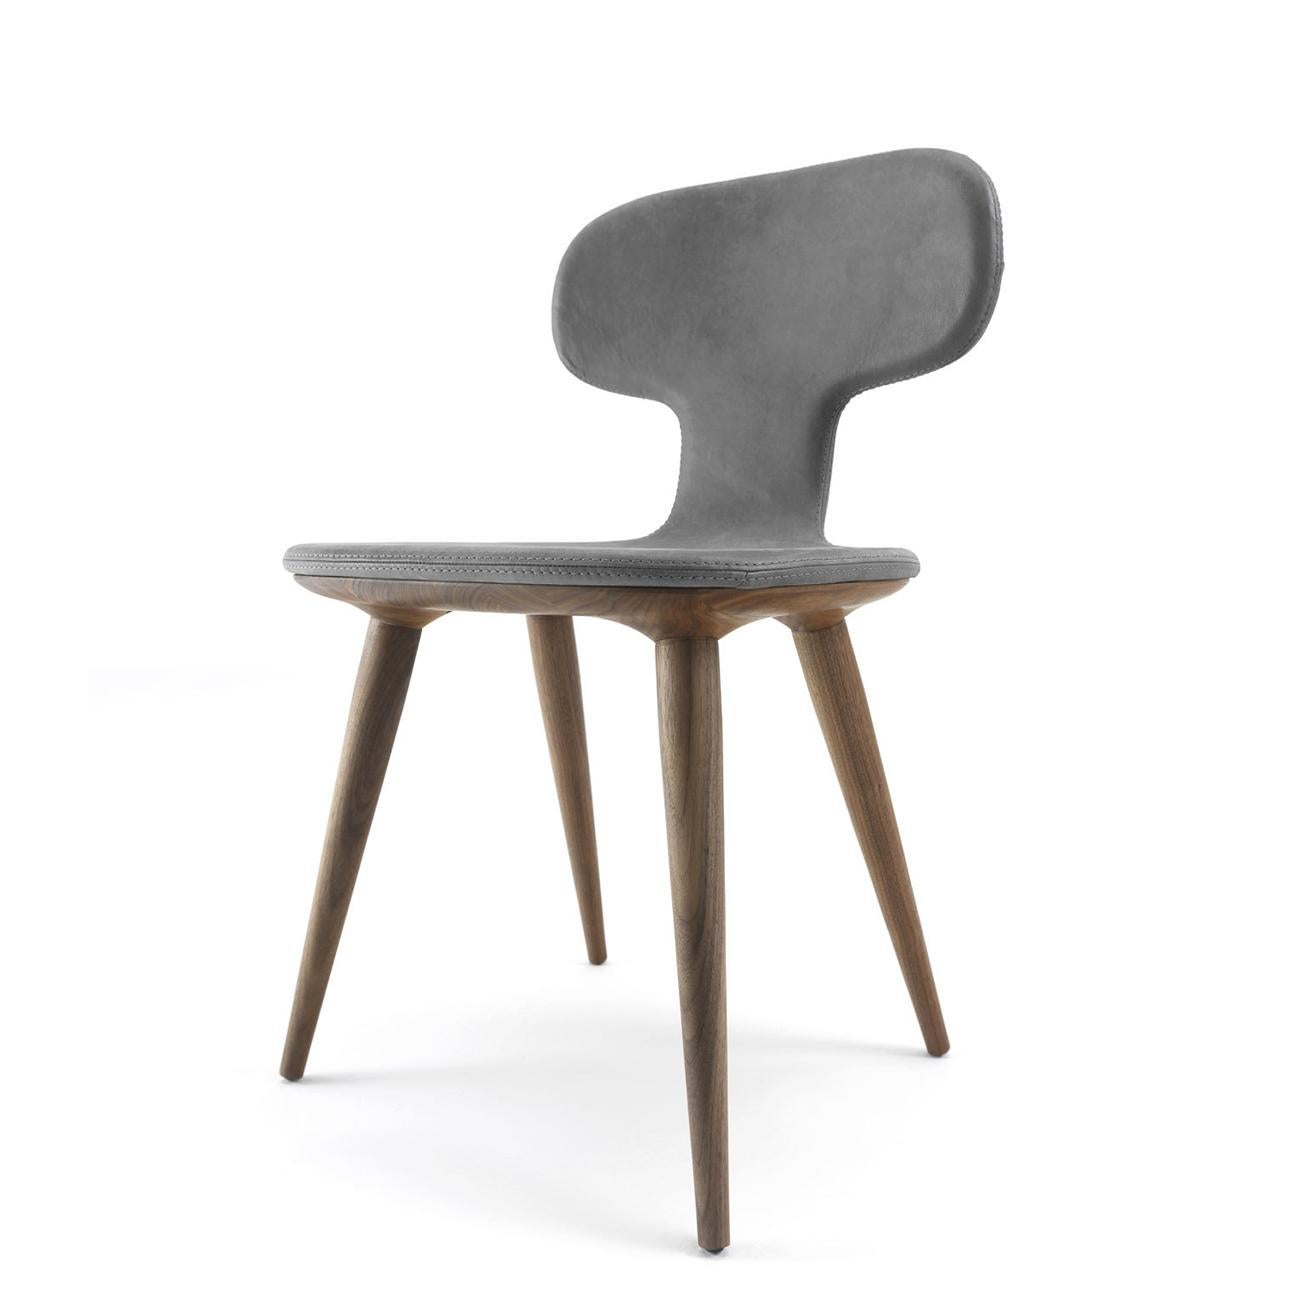 Dining chair racing with grey genuine leather 
made with sinuous and enveloping forms, visible stitching, 
with solid walnut wood shaped structure. Wood treated with
natural wax of vegetable origin with pine extracts finish. 
Also available with